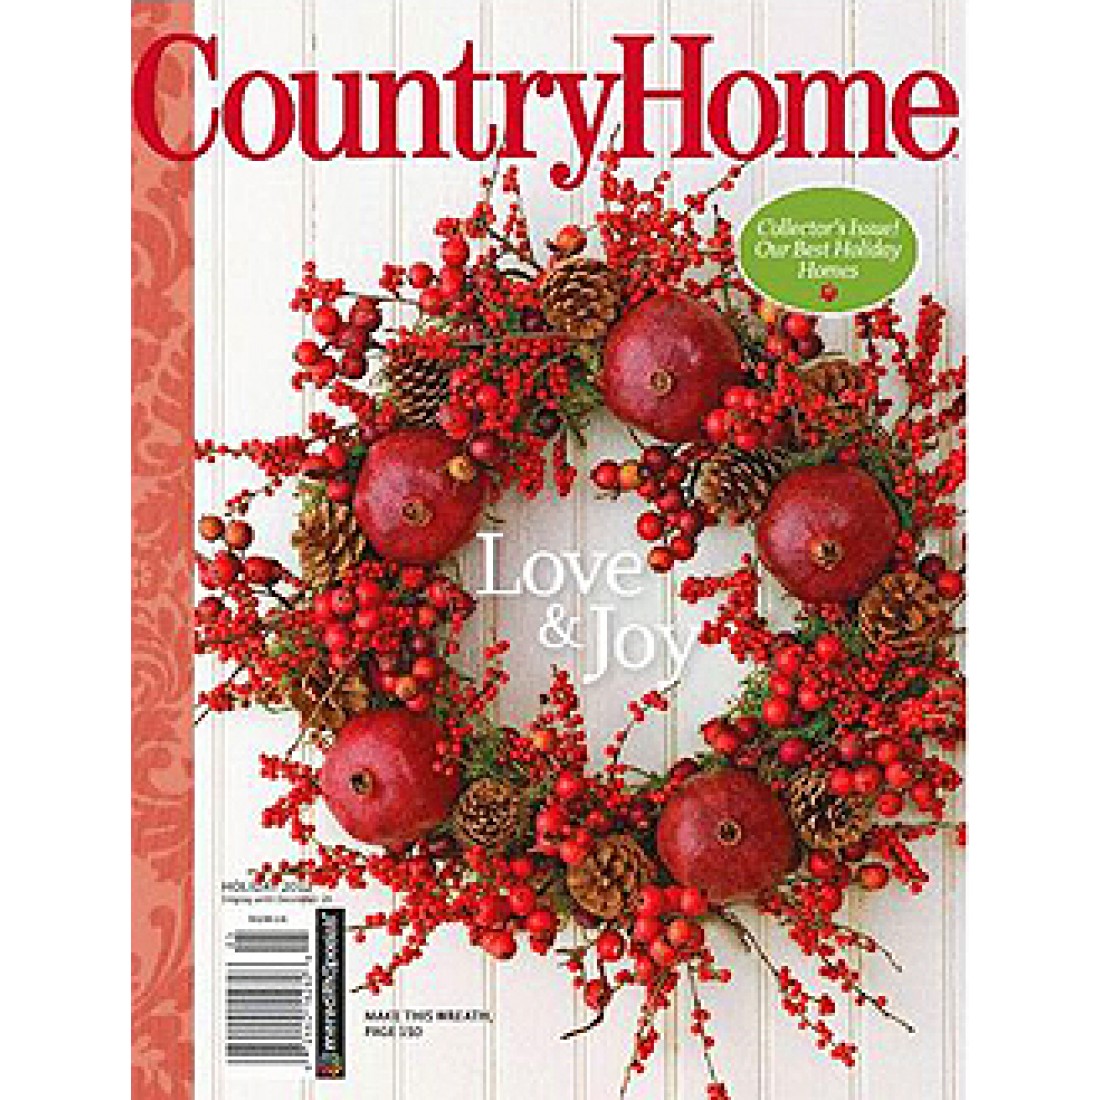 Country Home Magazine Subscriber Services